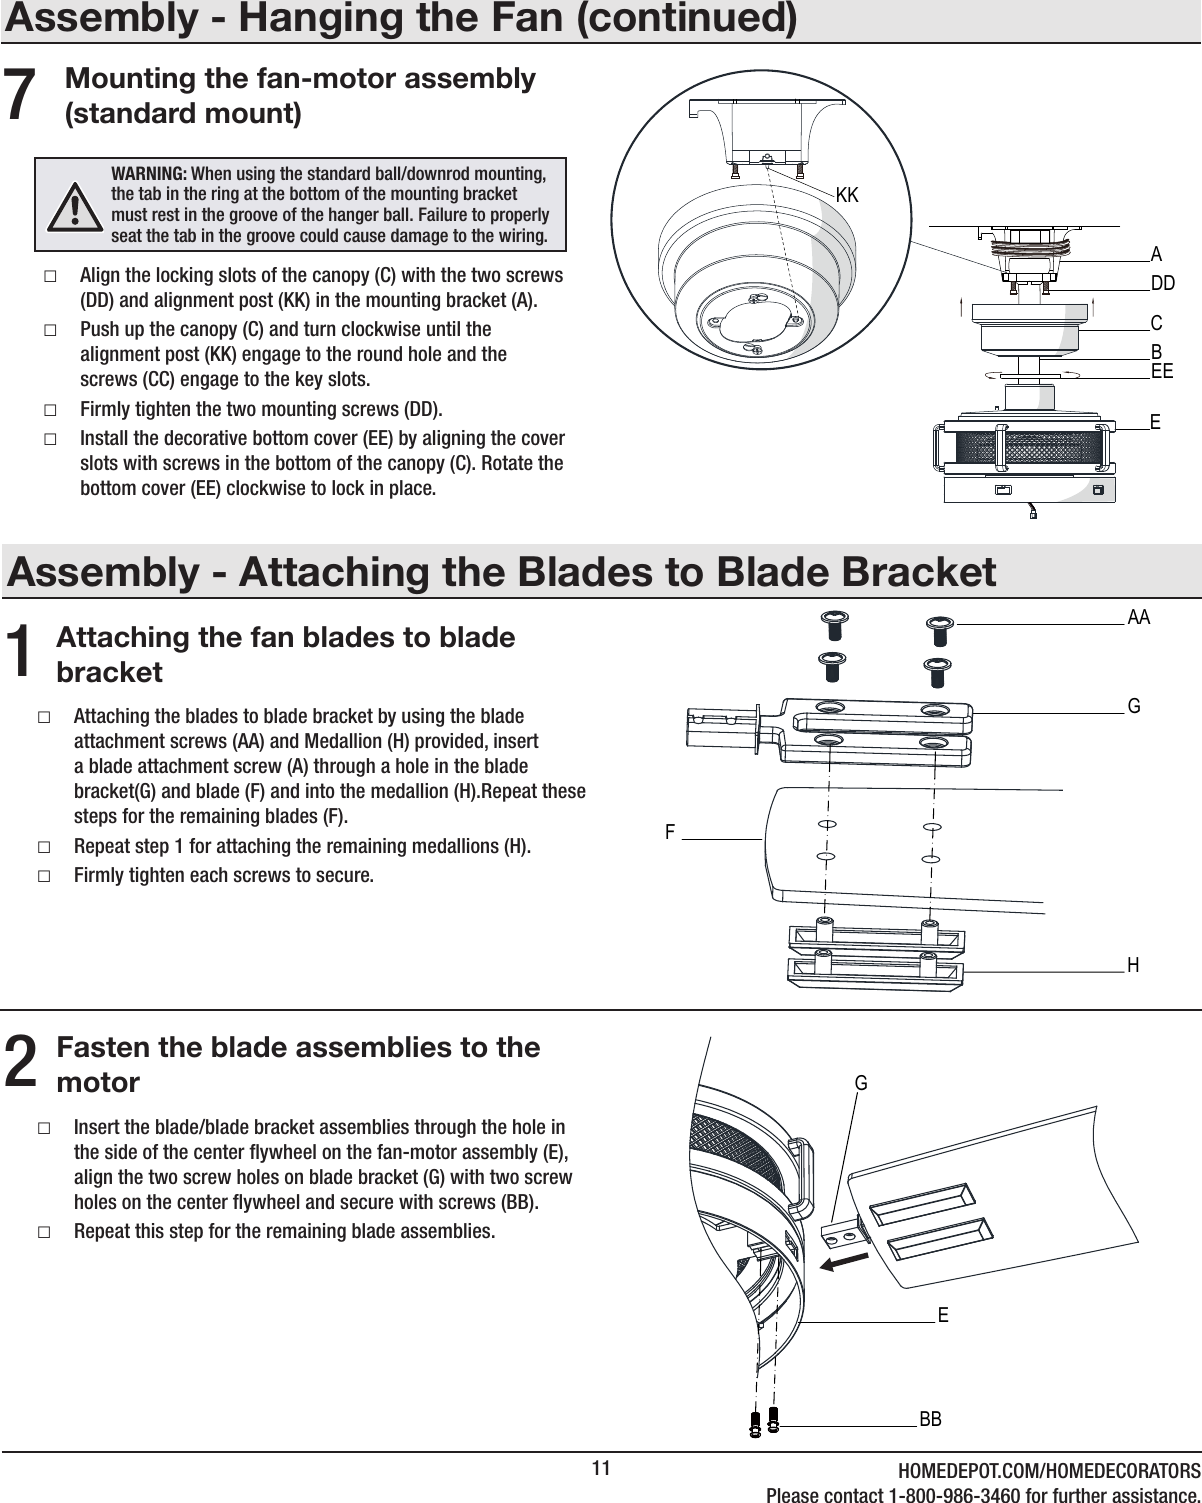 11 HOMEDEPOT.COM/HOMEDECORATORSPlease contact 1-800-986-3460 for further assistance.Assembly - Attaching the Blades to Blade BracketAttaching the fan blades to blade bracket1 □Attaching the blades to blade bracket by using the blade attachment screws (AA) and Medallion (H) provided, insert a blade attachment screw (A) through a hole in the blade bracket(G) and blade (F) and into the medallion (H).Repeat these steps for the remaining blades (F). □Repeat step 1 for attaching the remaining medallions (H). □Firmly tighten each screws to secure.Assembly - Hanging the Fan (continued)Mounting the fan-motor assembly (standard mount) □Align the locking slots of the canopy (C) with the two screws (DD) and alignment post (KK) in the mounting bracket (A). □Push up the canopy (C) and turn clockwise until the alignment post (KK) engage to the round hole and the screws (CC) engage to the key slots. □Firmly tighten the two mounting screws (DD). □Install the decorative bottom cover (EE) by aligning the cover slots with screws in the bottom of the canopy (C). Rotate the bottom cover (EE) clockwise to lock in place.7WARNING: When using the standard ball/downrod mounting, the tab in the ring at the bottom of the mounting bracket must rest in the groove of the hanger ball. Failure to properly seat the tab in the groove could cause damage to the wiring.CADDEEBEKKFasten the blade assemblies to the motor2 □Insert the blade/blade bracket assemblies through the hole in the side of the center ywheel on the fan-motor assembly (E), align the two screw holes on blade bracket (G) with two screw holes on the center ywheel and secure with screws (BB). □Repeat this step for the remaining blade assemblies.EGBBGAAHF